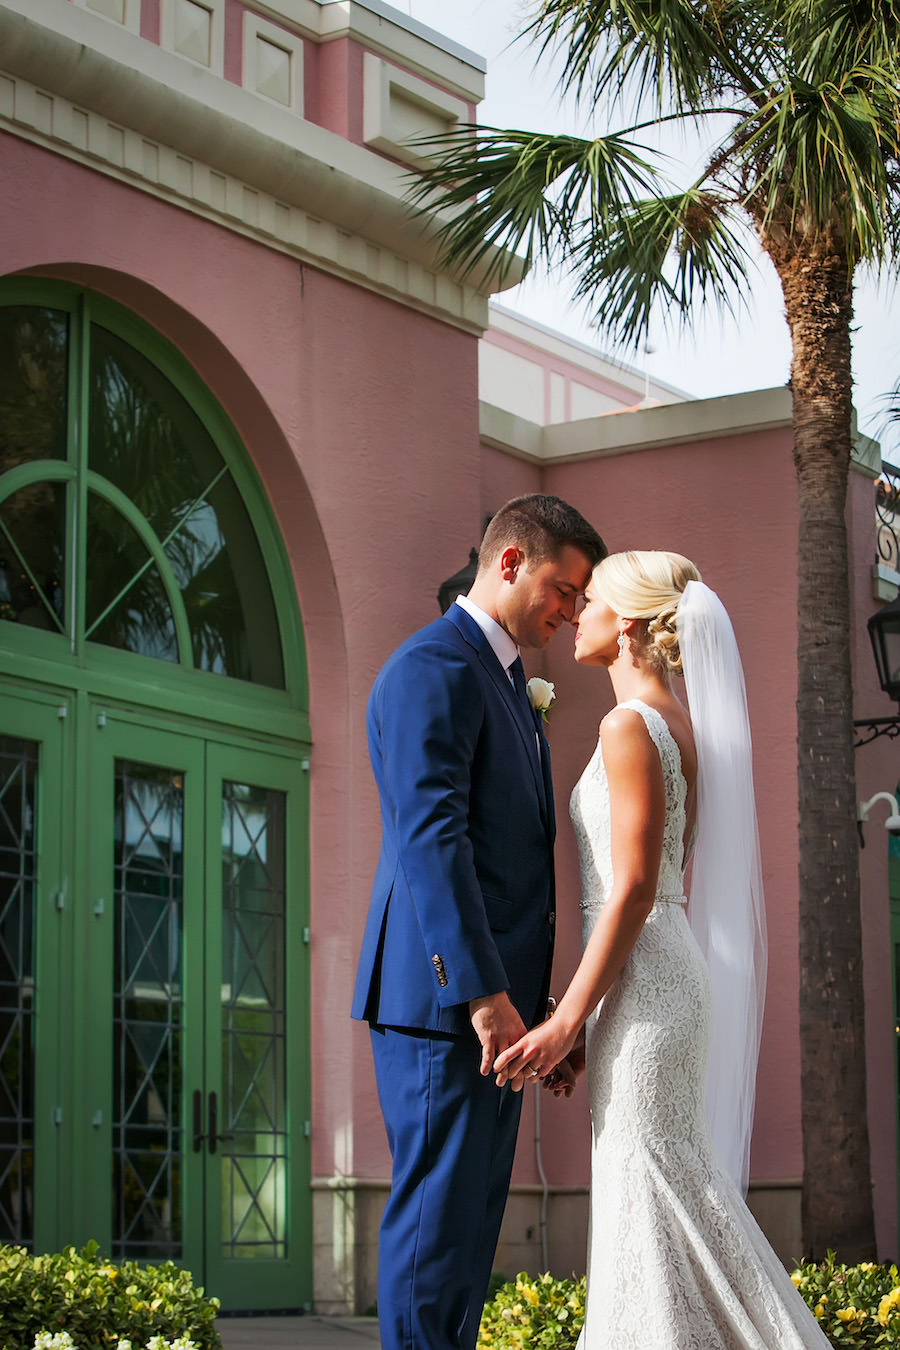 Outdoor St. Pete Bride and Groom Wedding Portrait at the Vinoy | St. Petersburg Wedding Photographer Limelight Photography